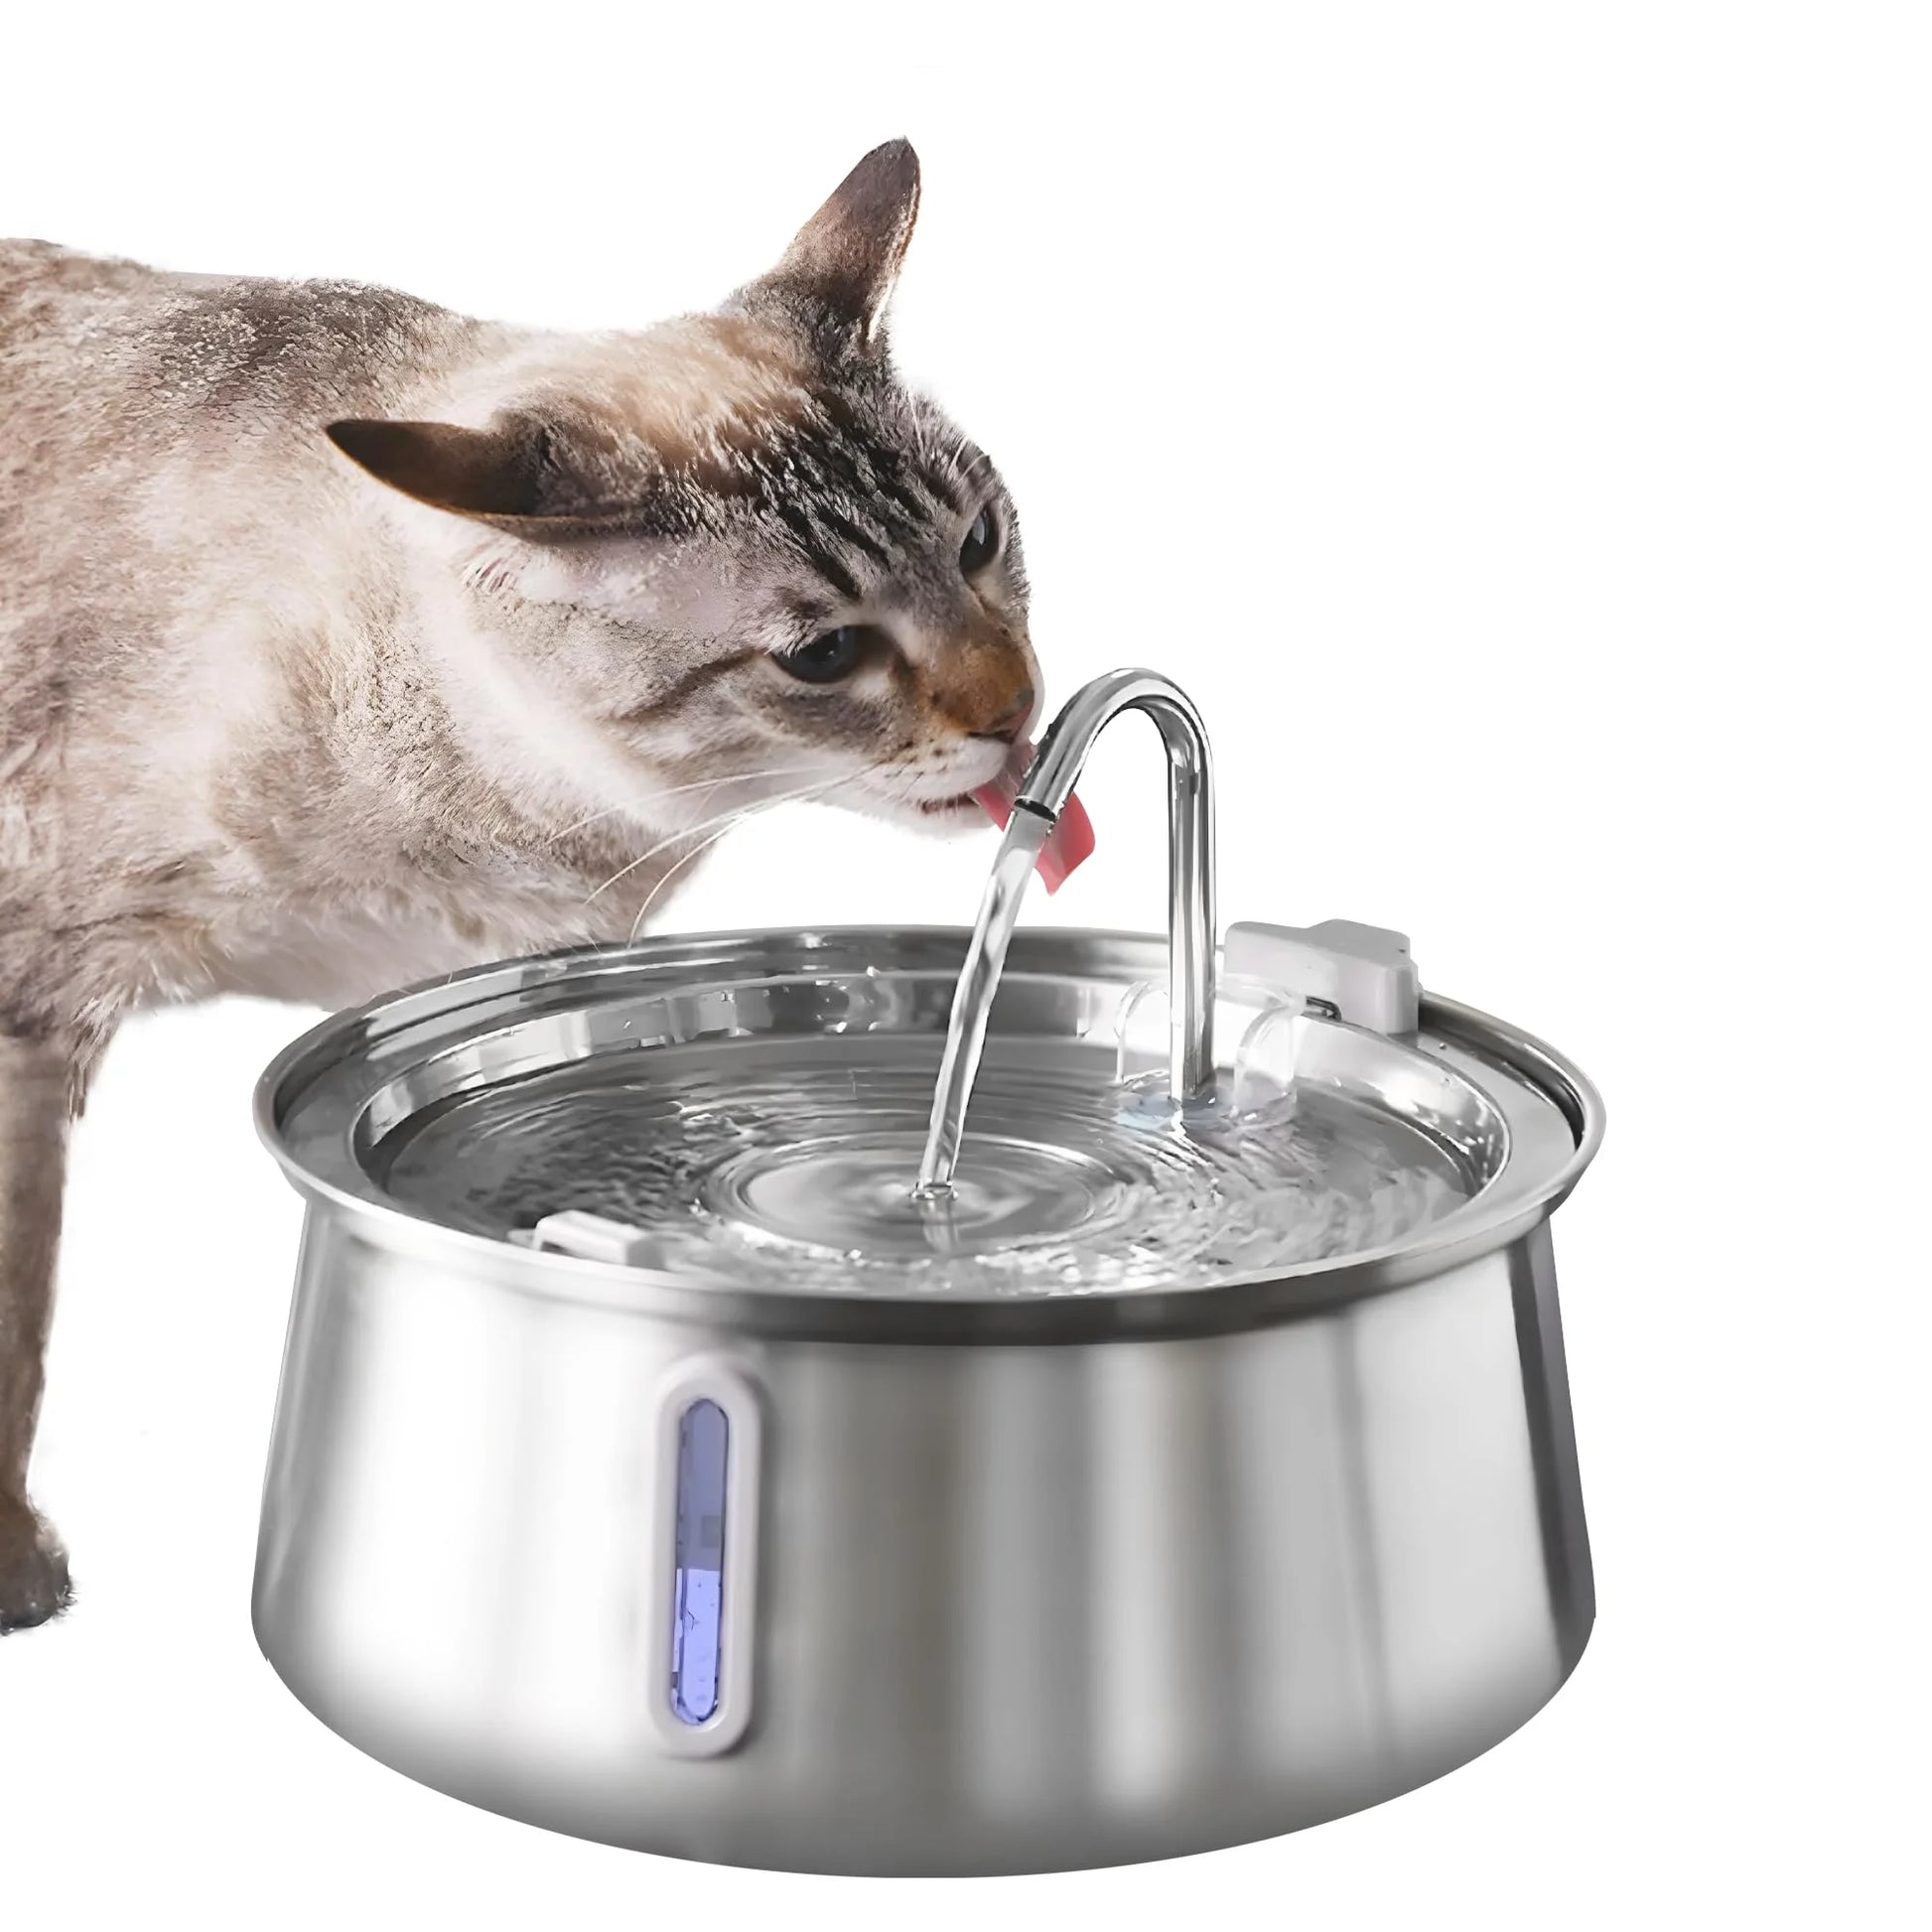 4L Stainless Steel Automatic Pet Drinking Fountain - ozonlineshopper